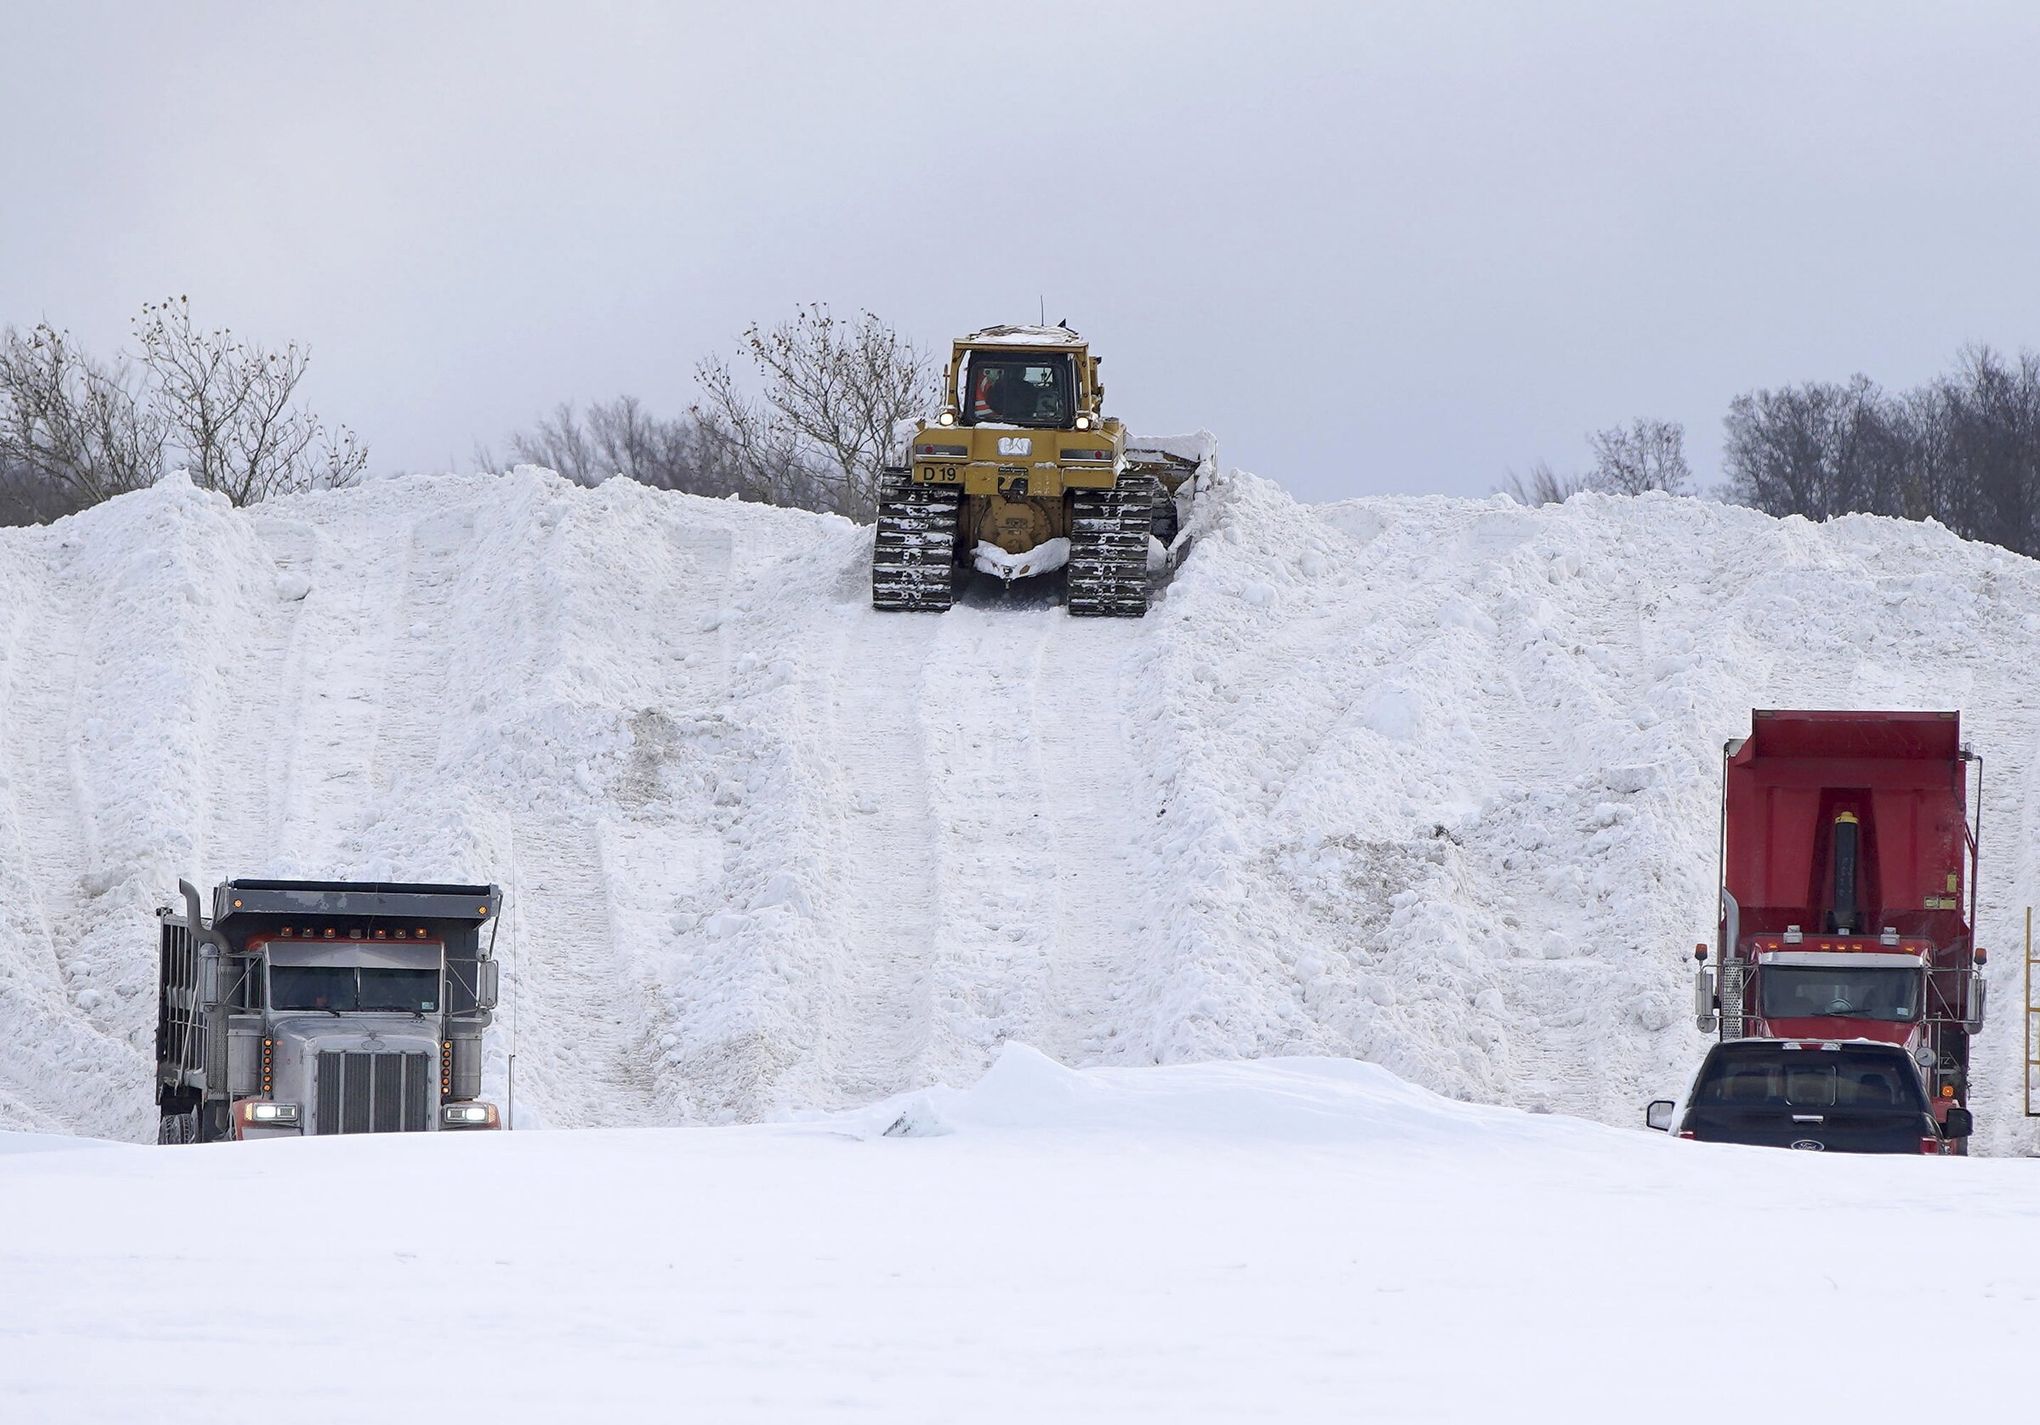 Buffalo buried under 6 feet of snow in record-breaking November blizzard